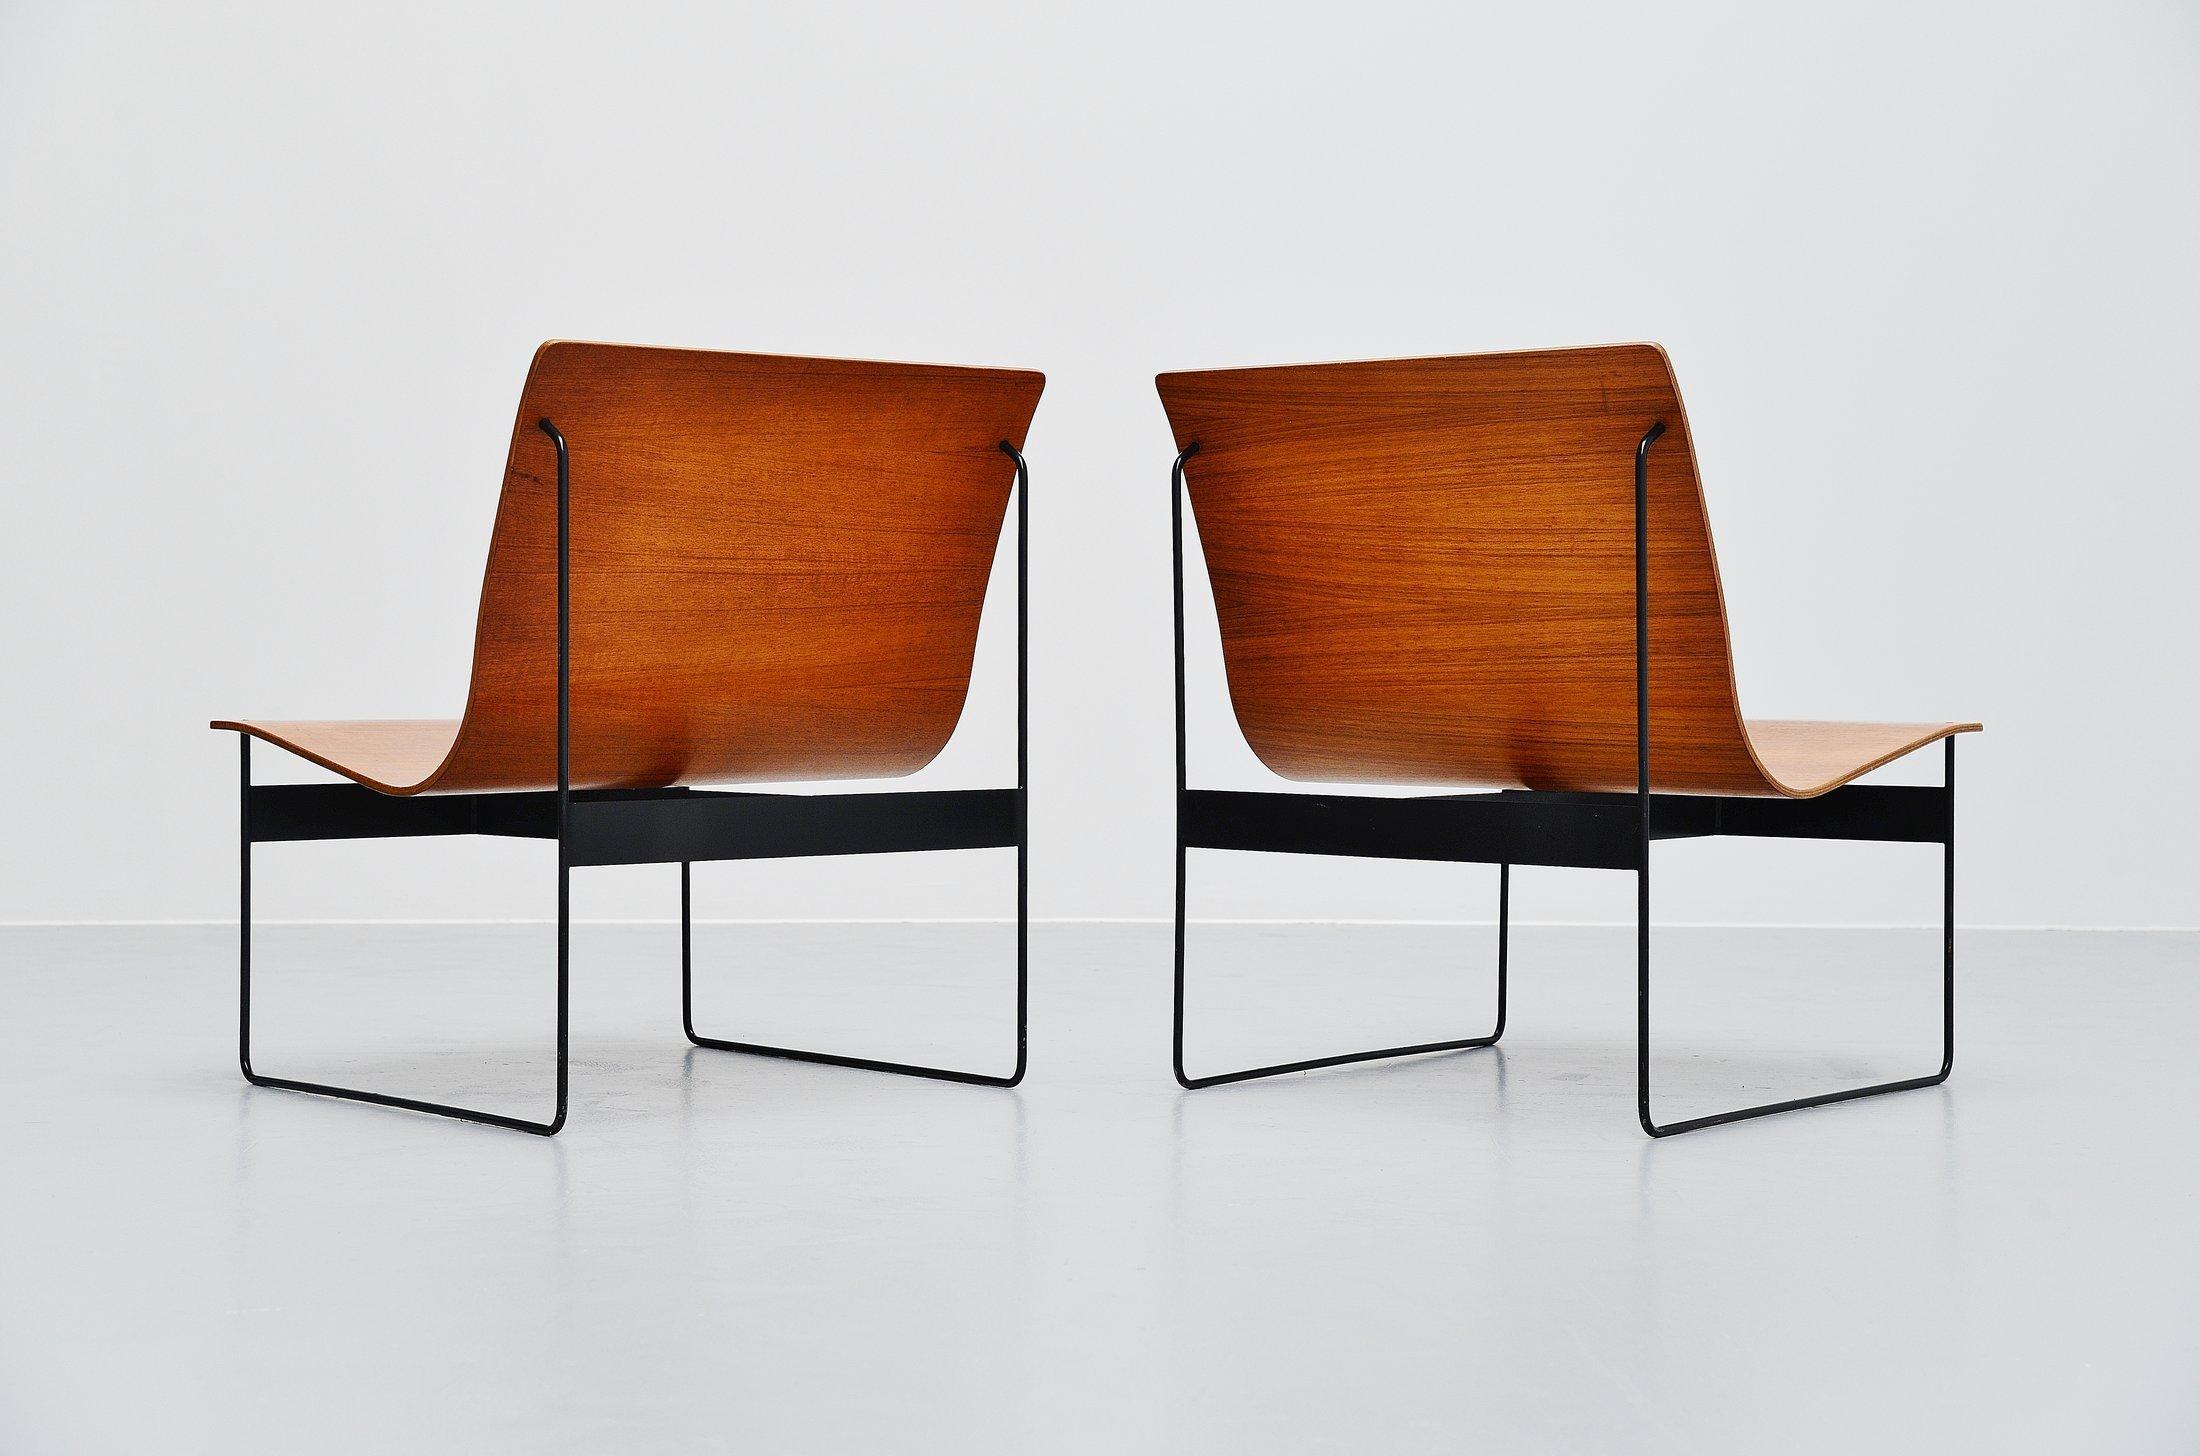 Amazing pair of plywood lounge chairs designed by Günter Renkel and manufactured by Rego, Germany, 1959. These chairs are made of teak plywood and have solid metal sophisticated sledge frames, black lacquered. The chairs have a very nice and warm